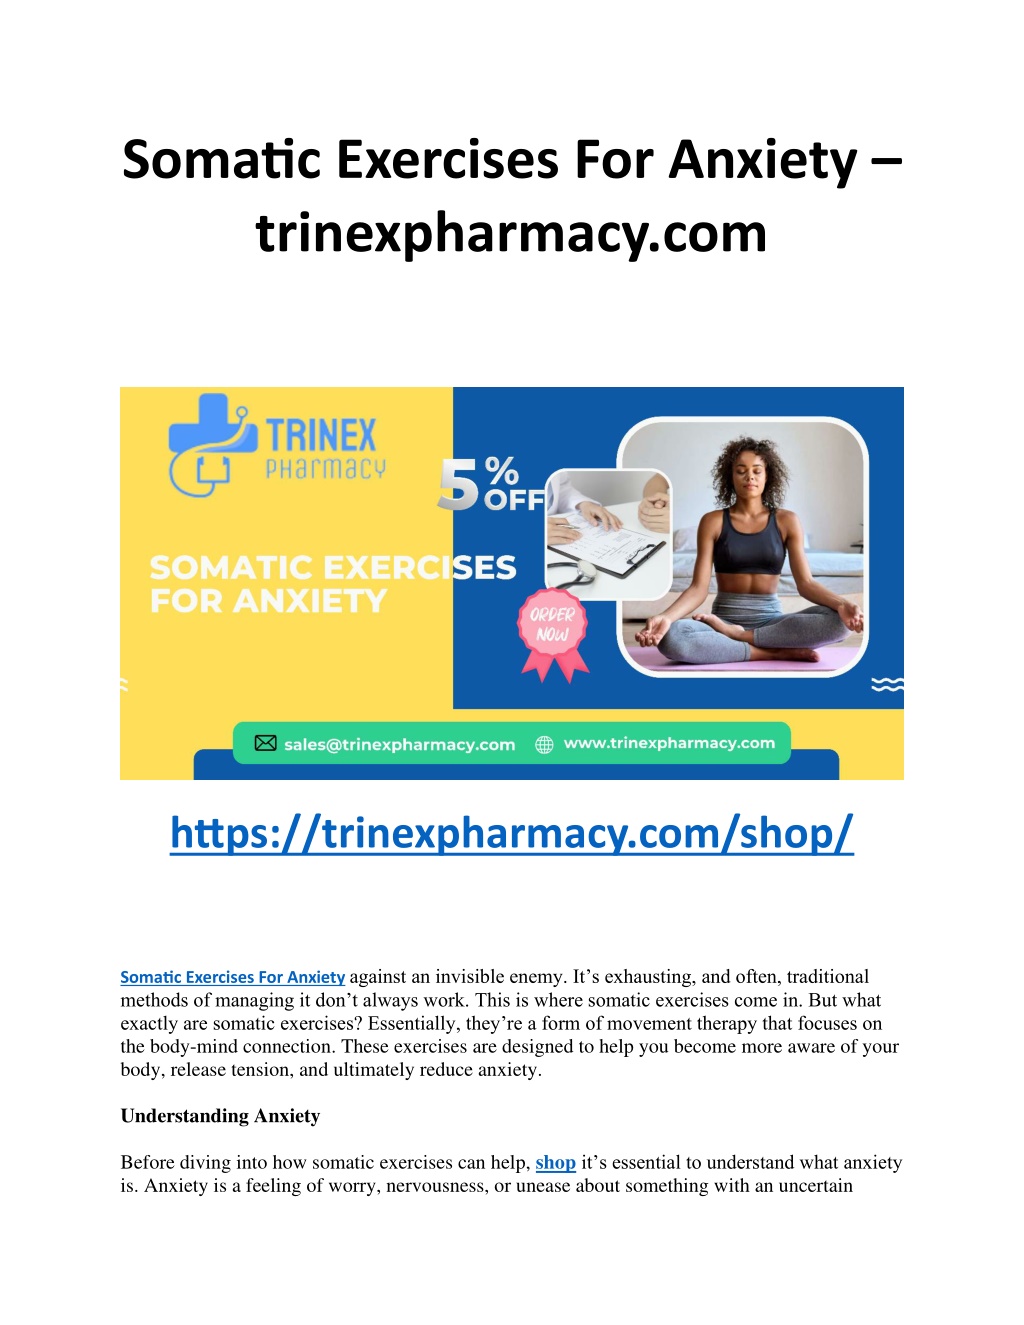 somatic exercises for anxiety trinexpharmacy com l.w